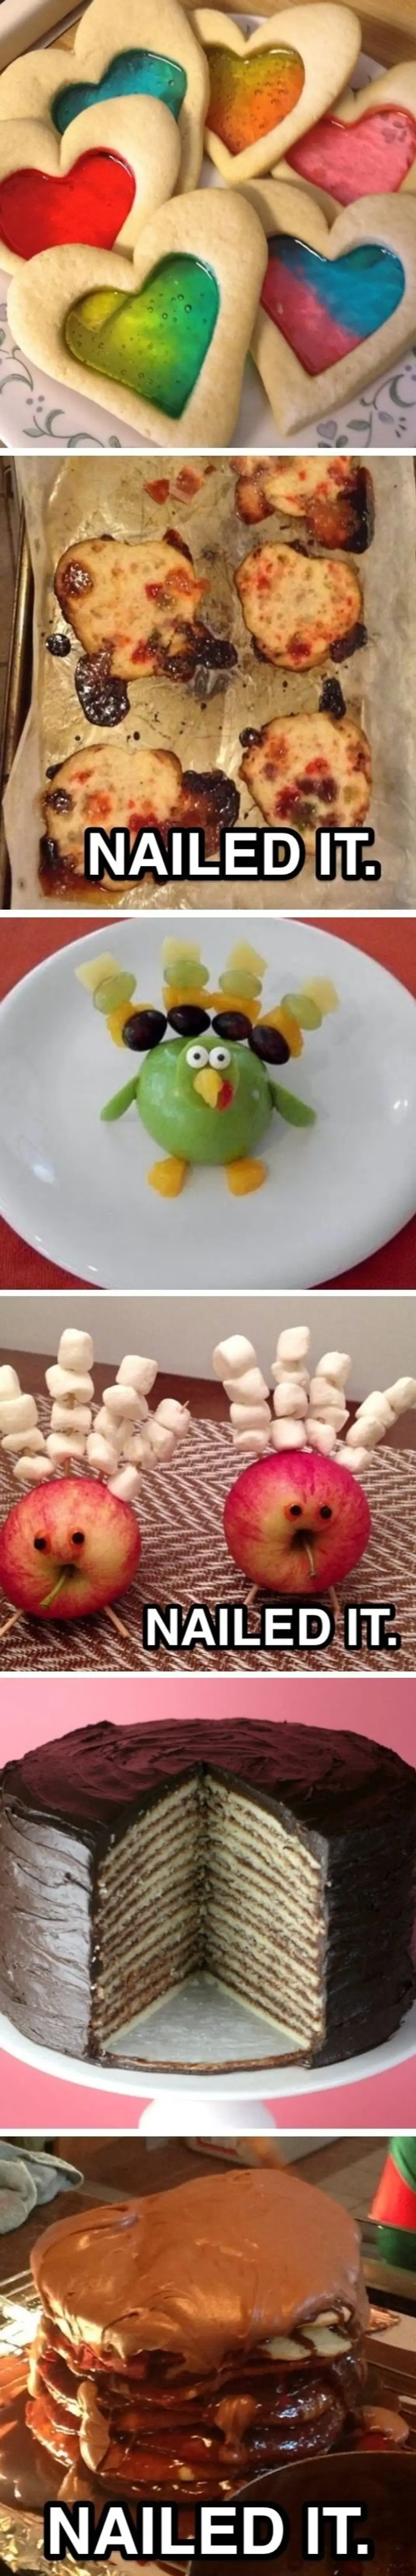 Stained Glass Cookies, Fruit Turkeys, and Chocolate Cake